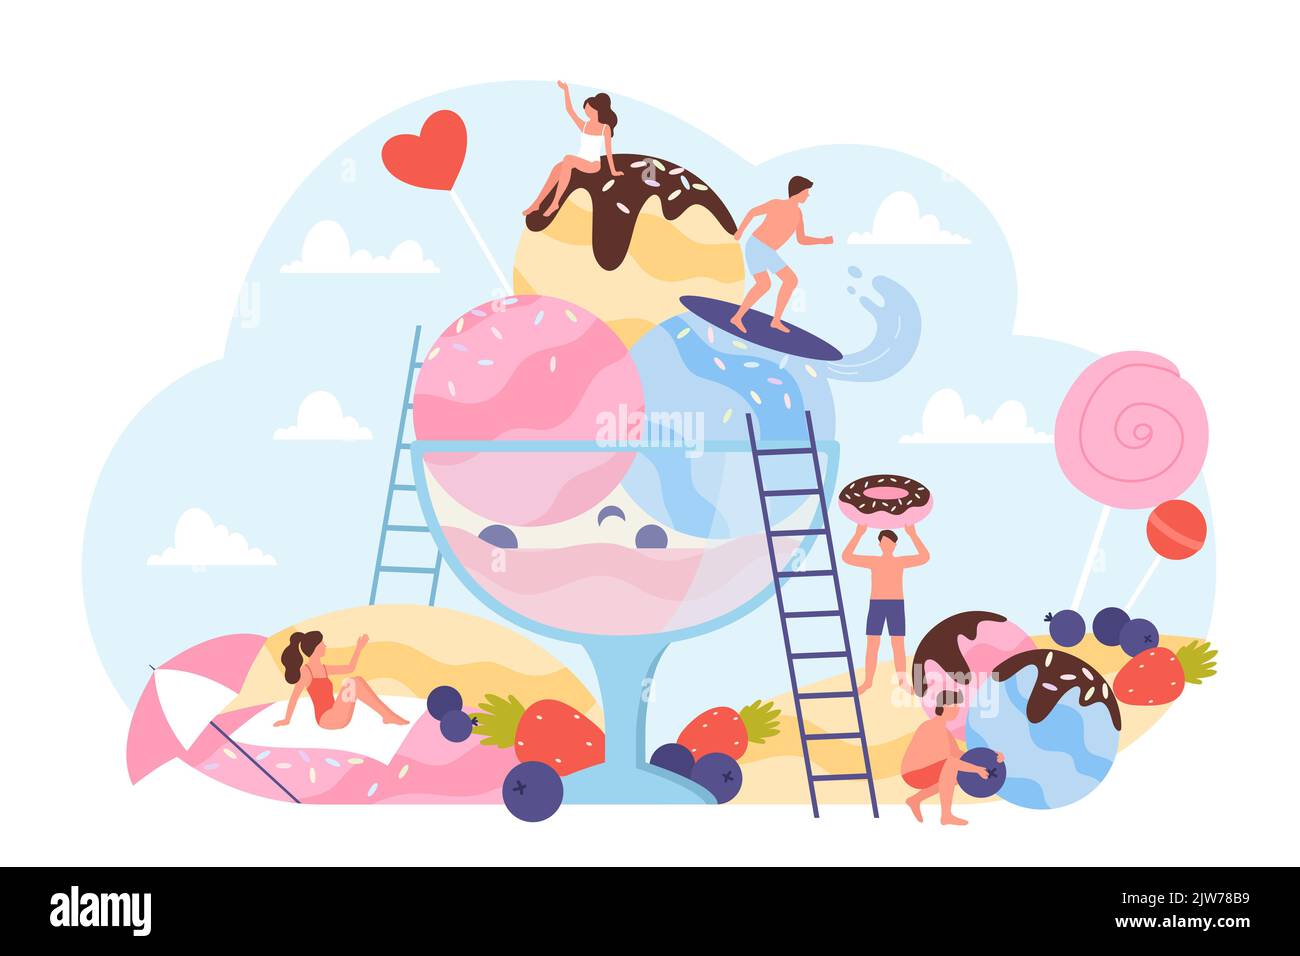 Ice cream beach party vector illustration. Cartoon summer camp scene with tiny young people sunbathing and surfing on creamy balls of ice cream in bowl, sundae with fruit, candy and chocolate syrup Stock Vector